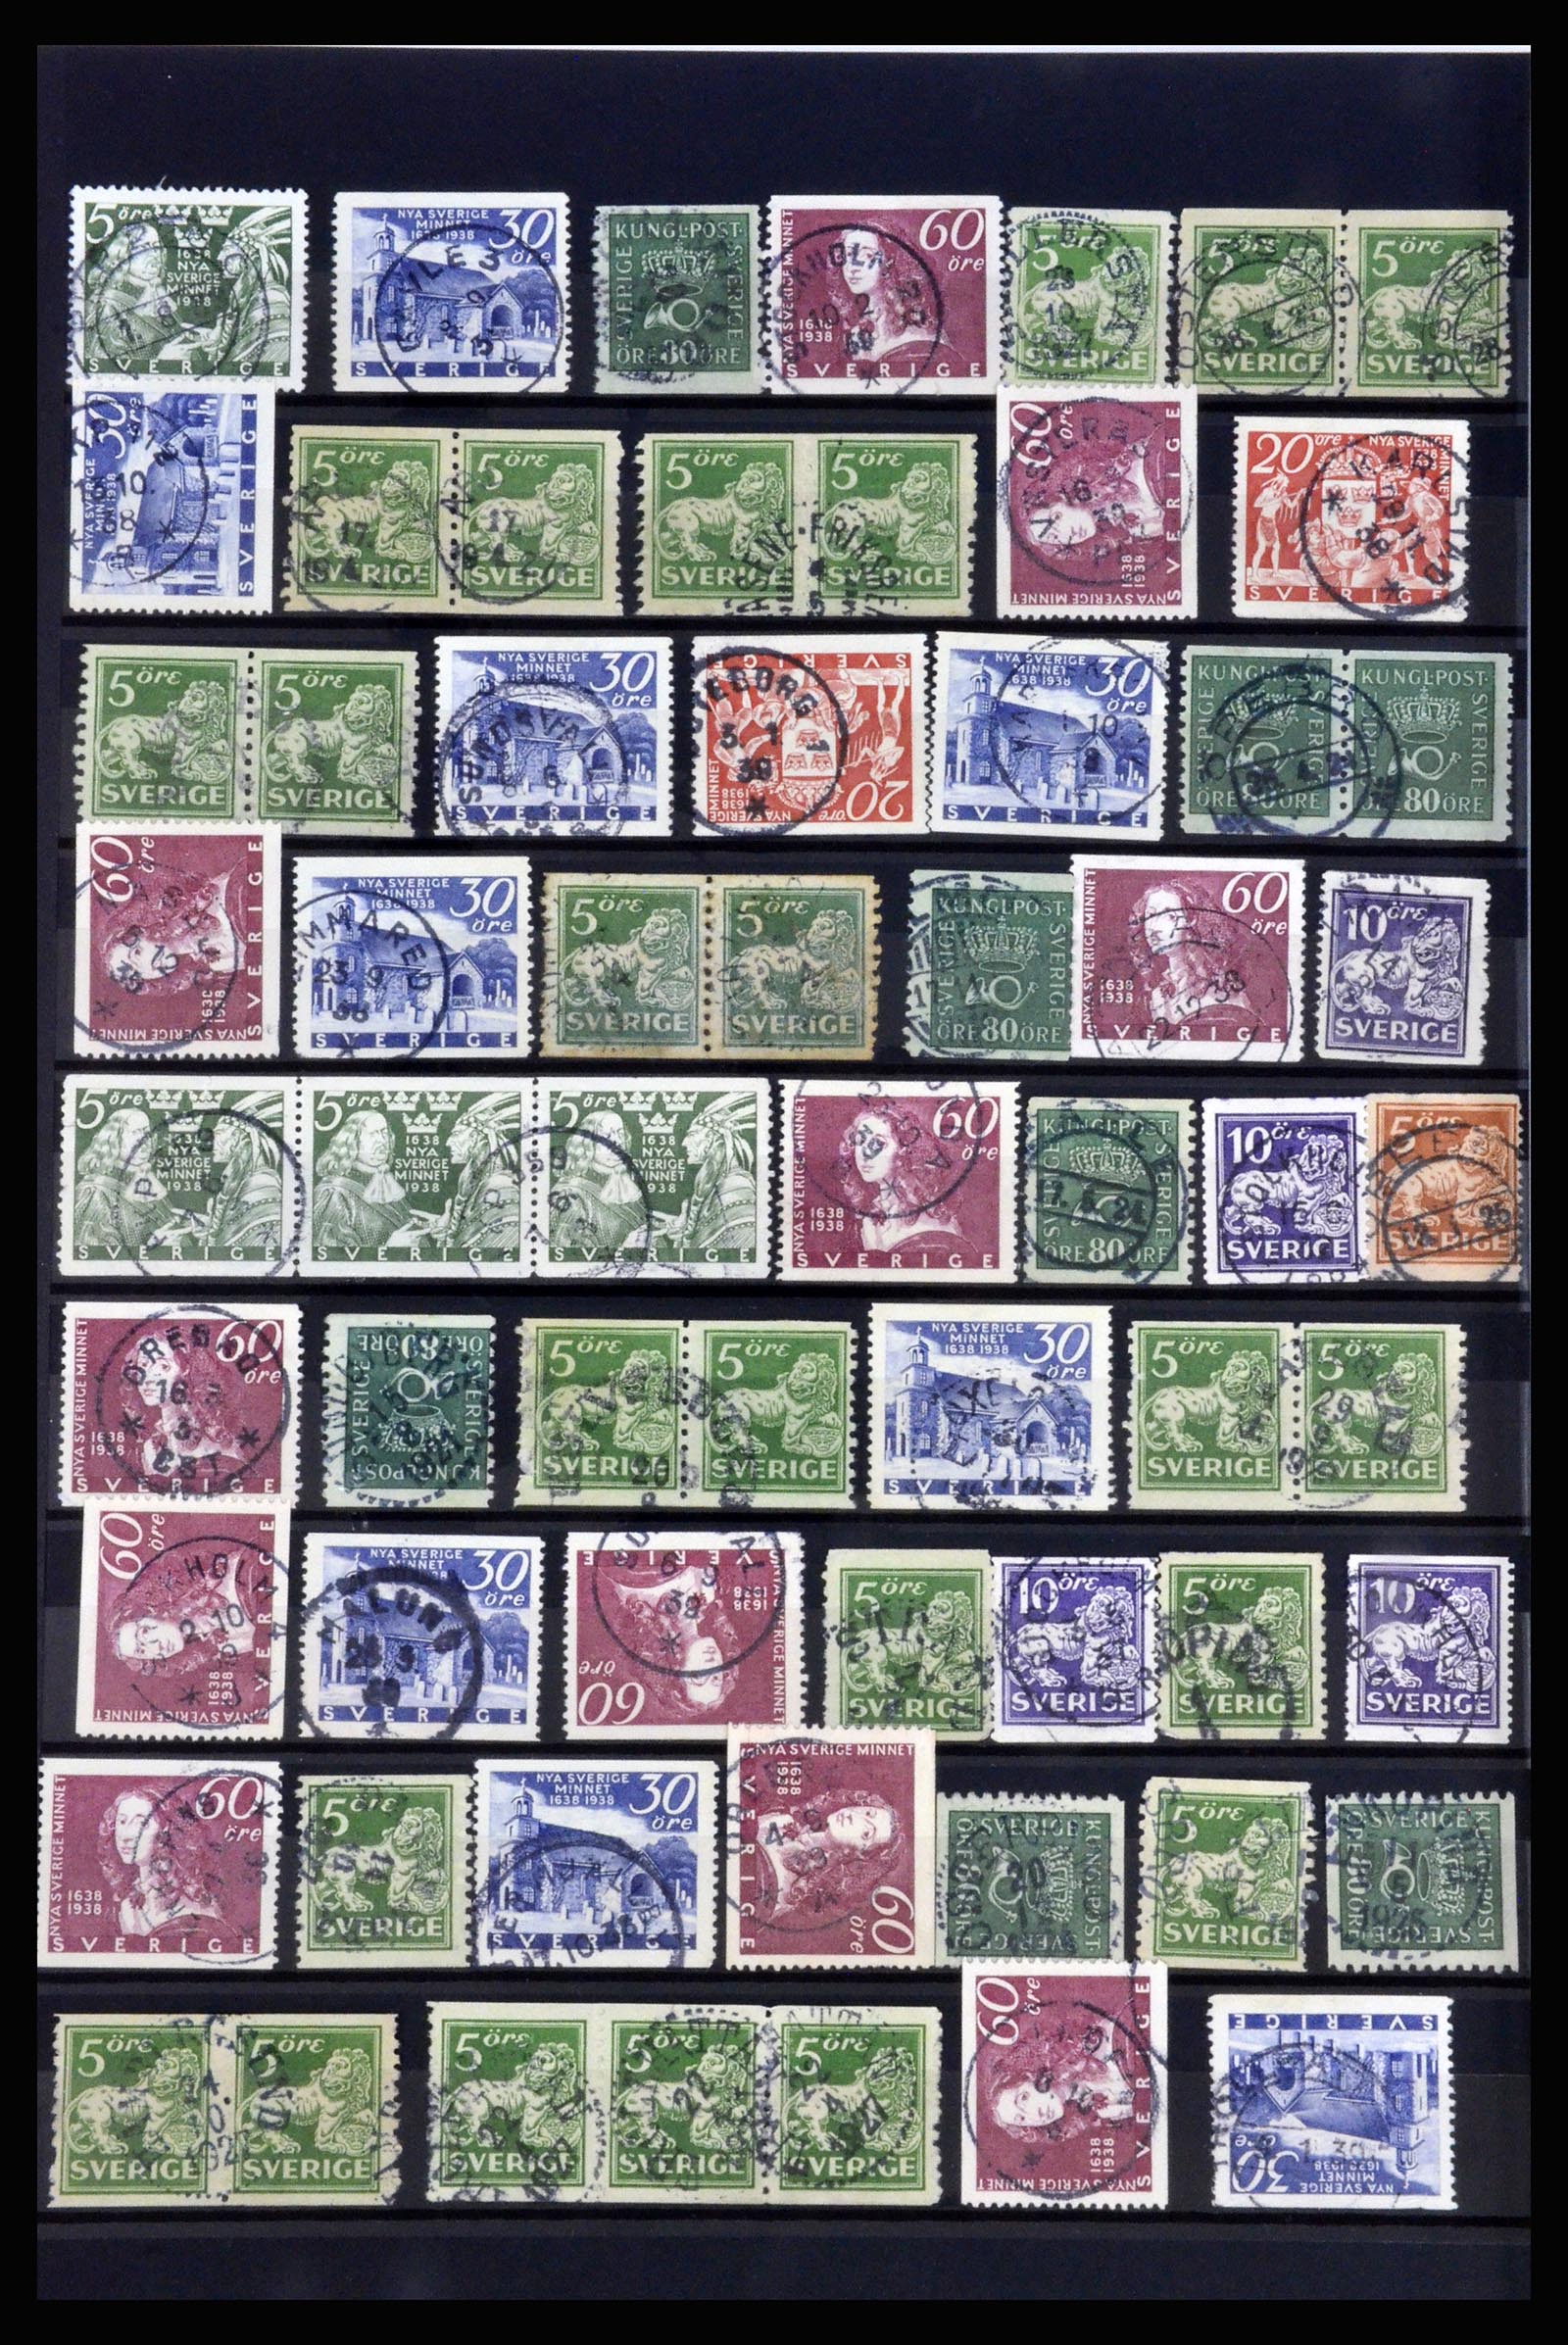 36316 040 - Stamp collection 36316 Sweden cancellations 1920-1938.